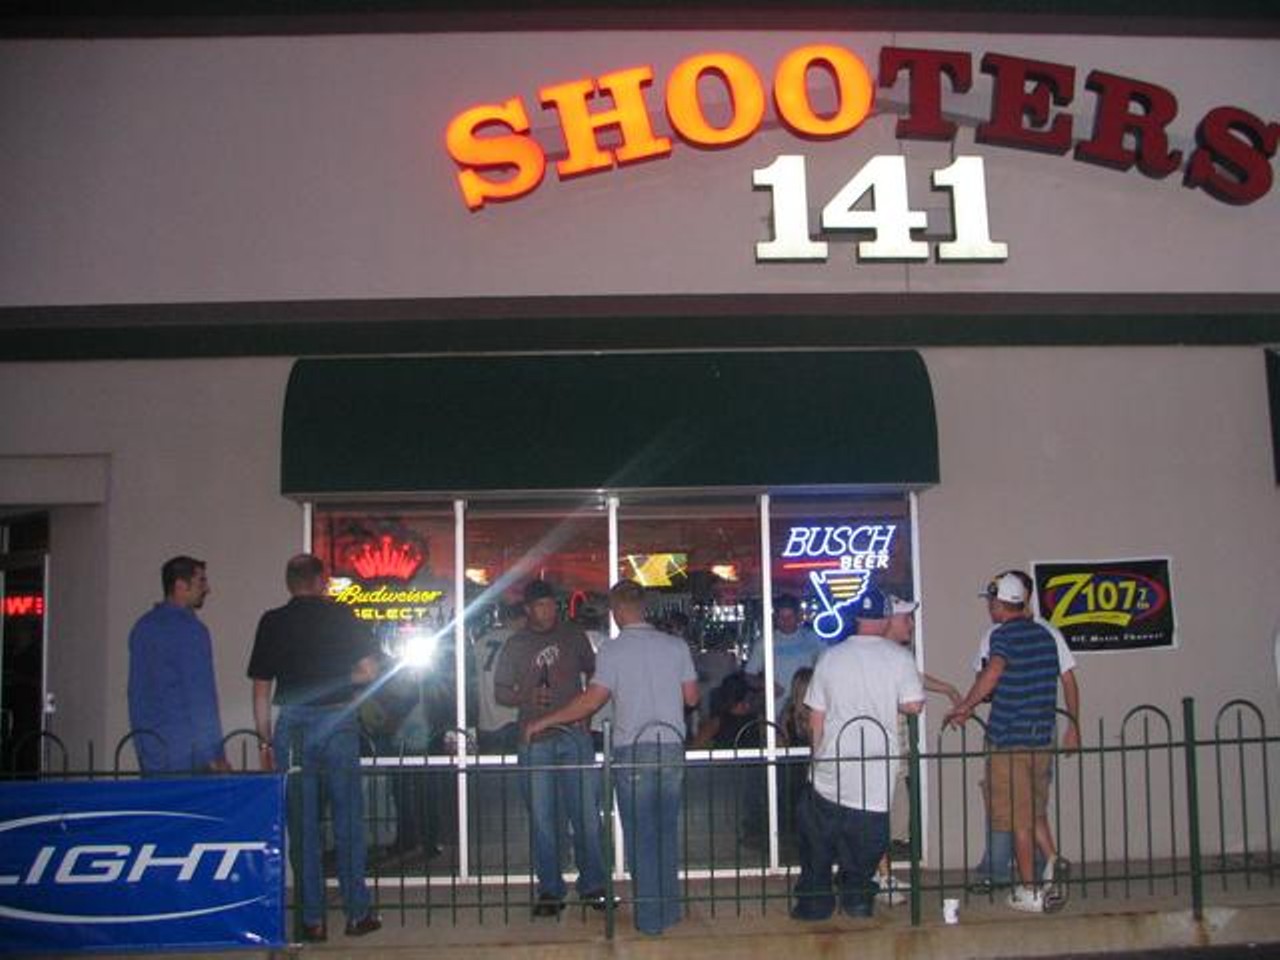 Shooter's 141